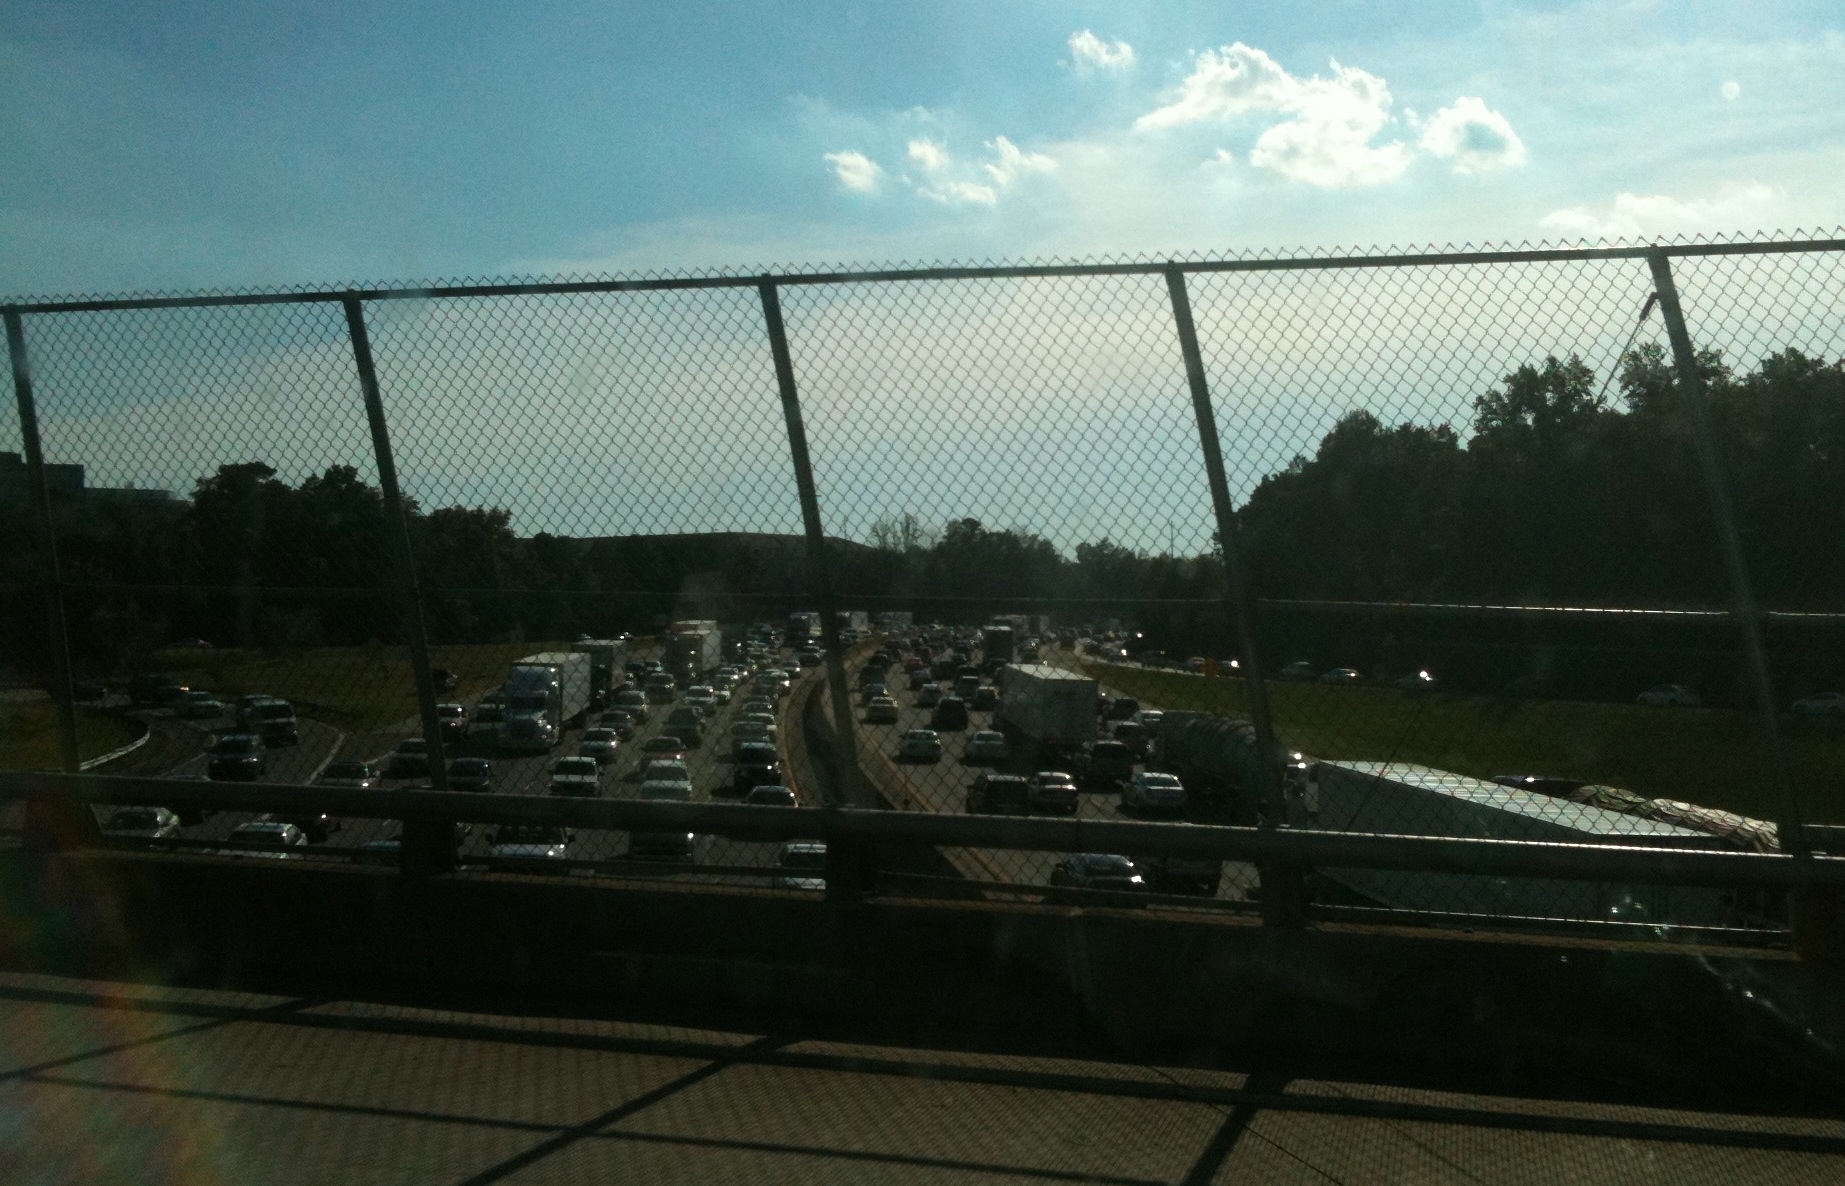 Afternoon rush-hou traffic backs up on I-285 beneath the Ga. 400 overpass. Credit: David Pendered